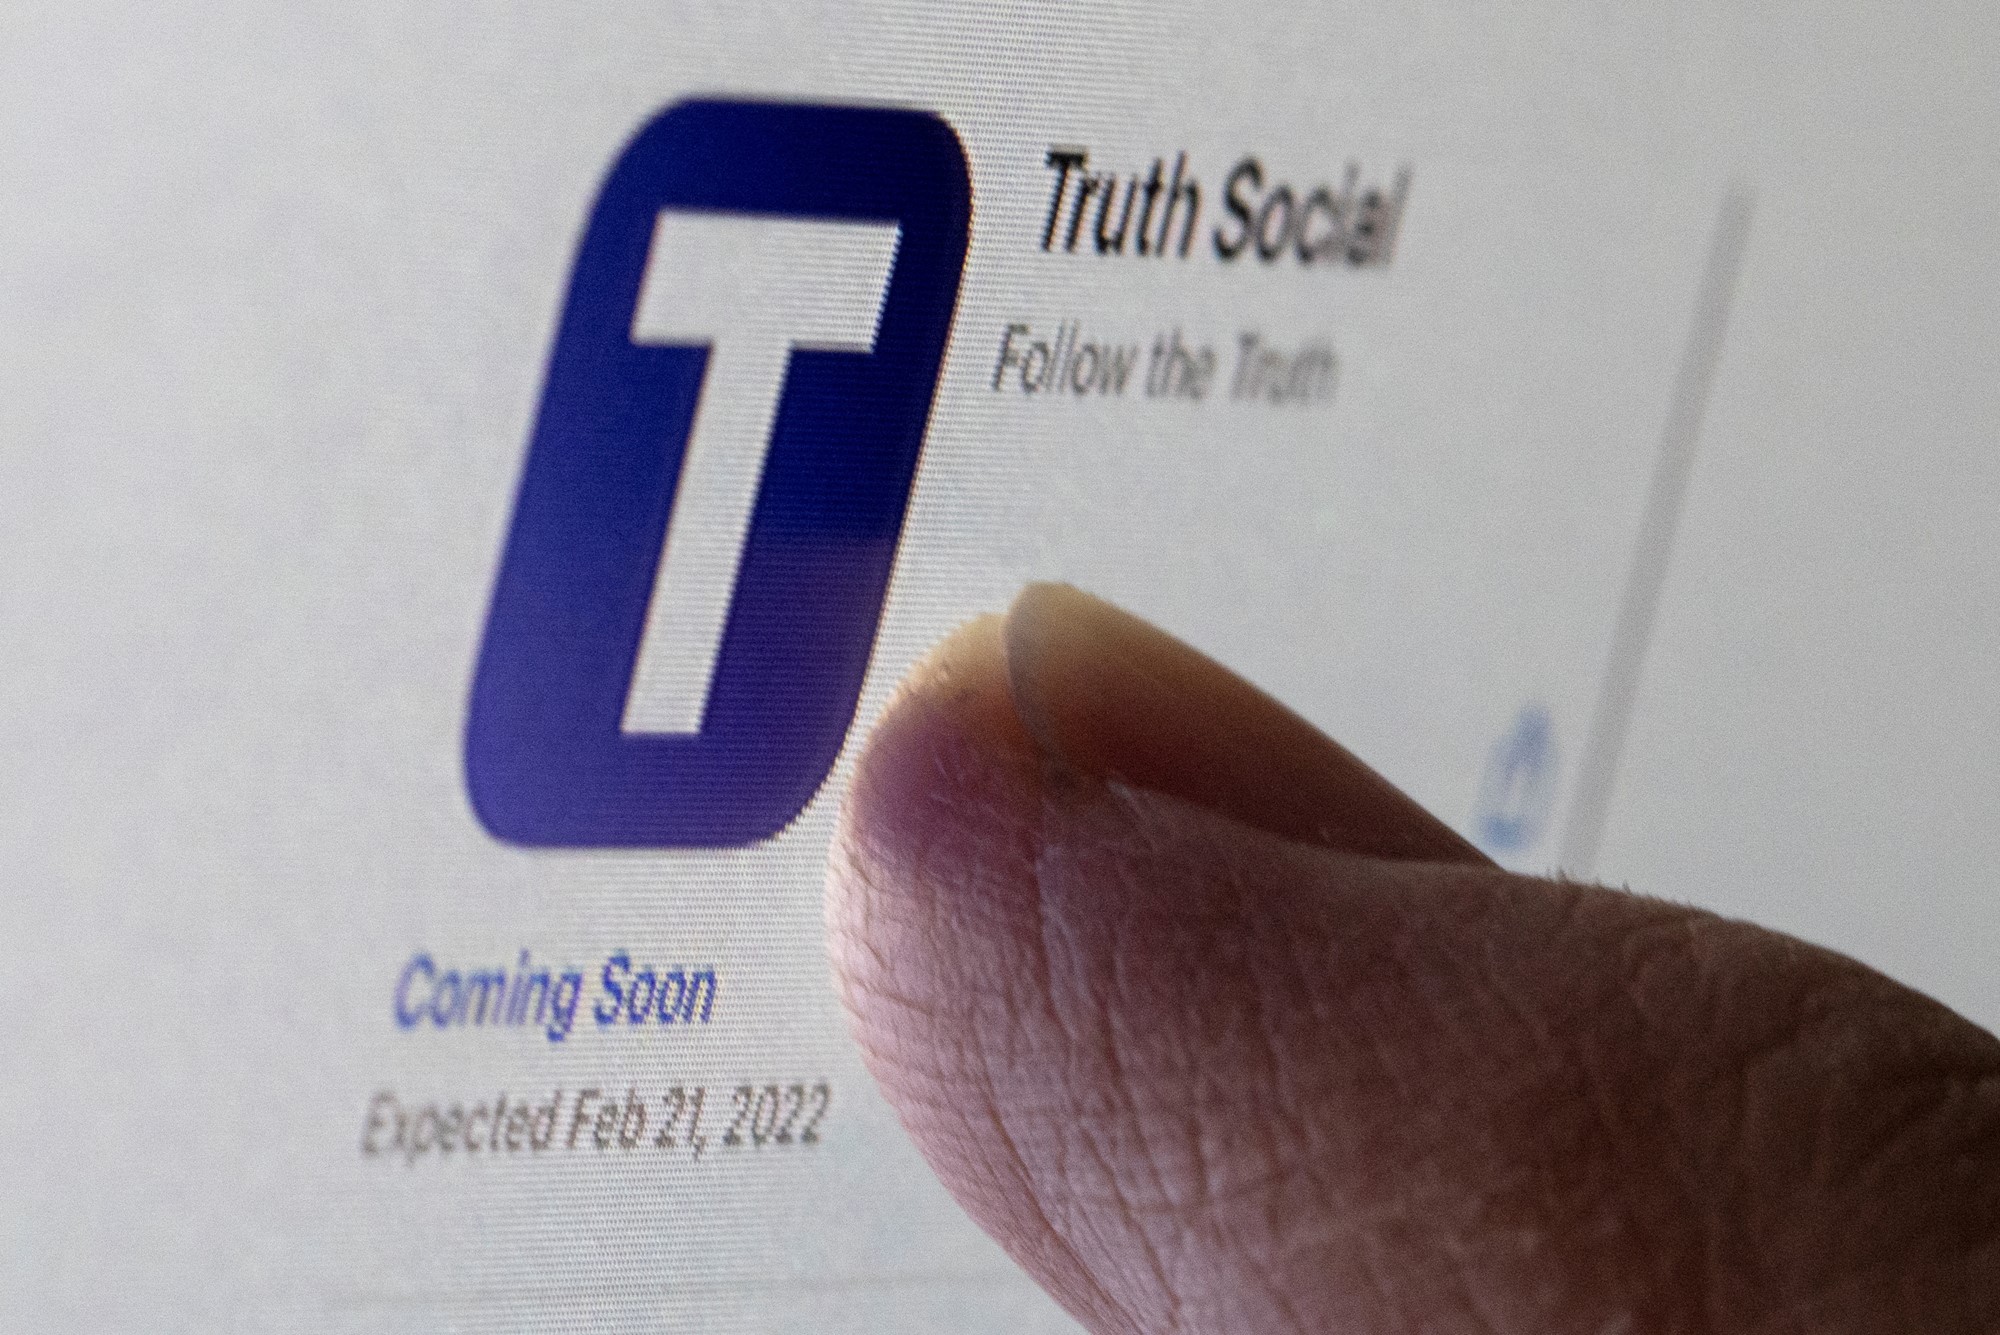 A Truth Social logo appears in an app store, with 'coming soon' underneath.